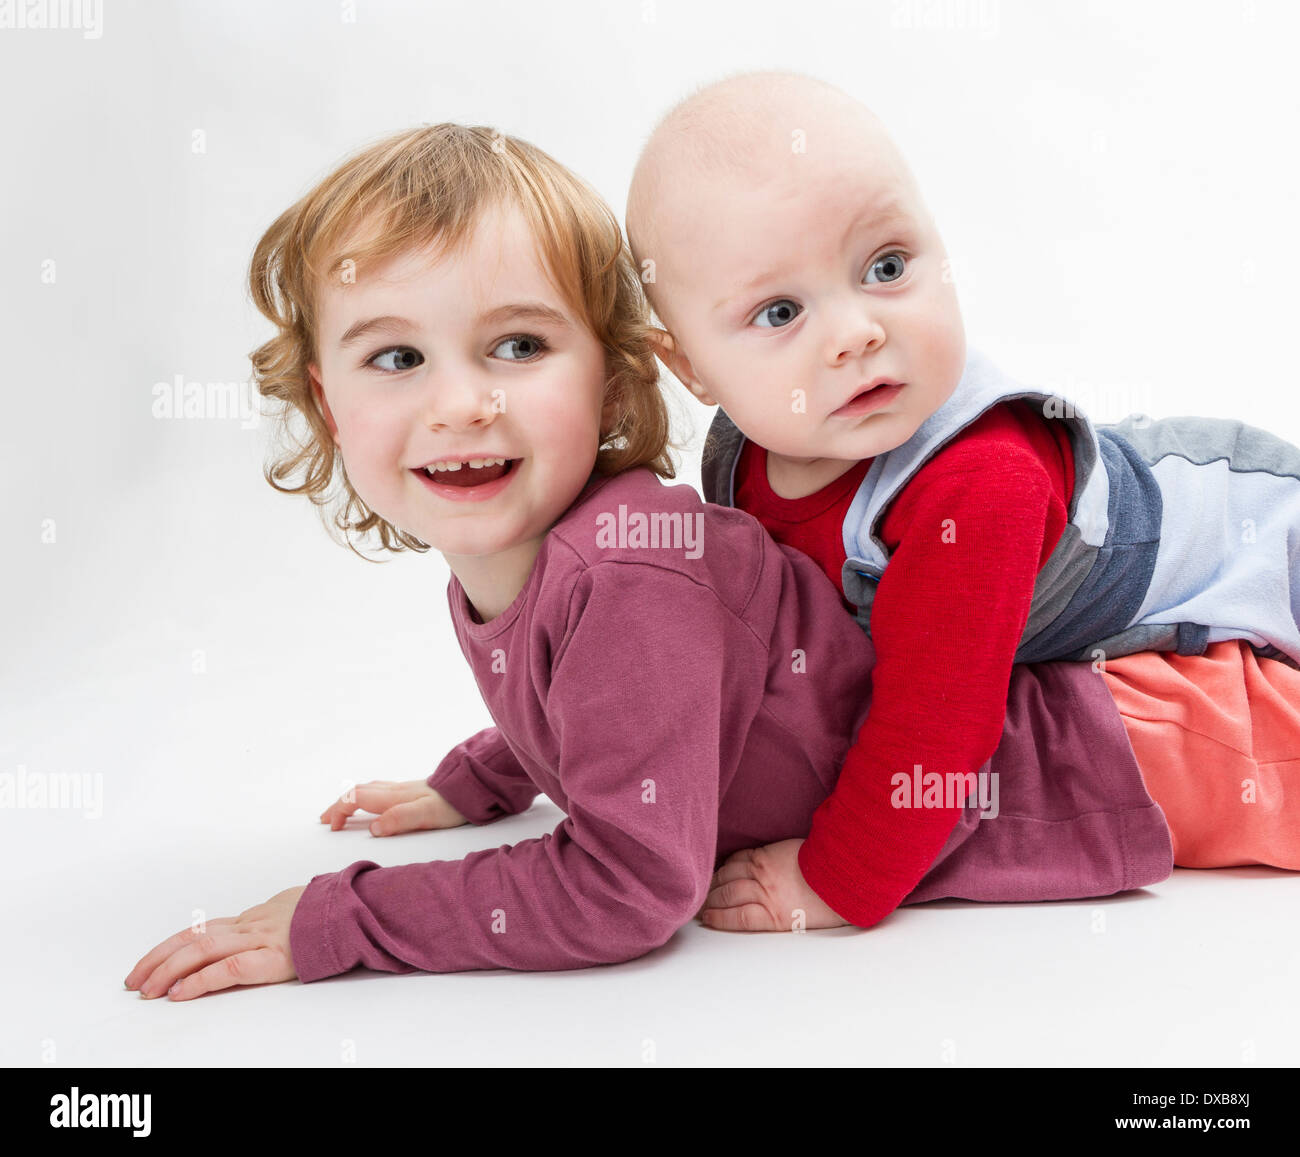 two siblings playing on floor. studio shot in grey background Stock Photo